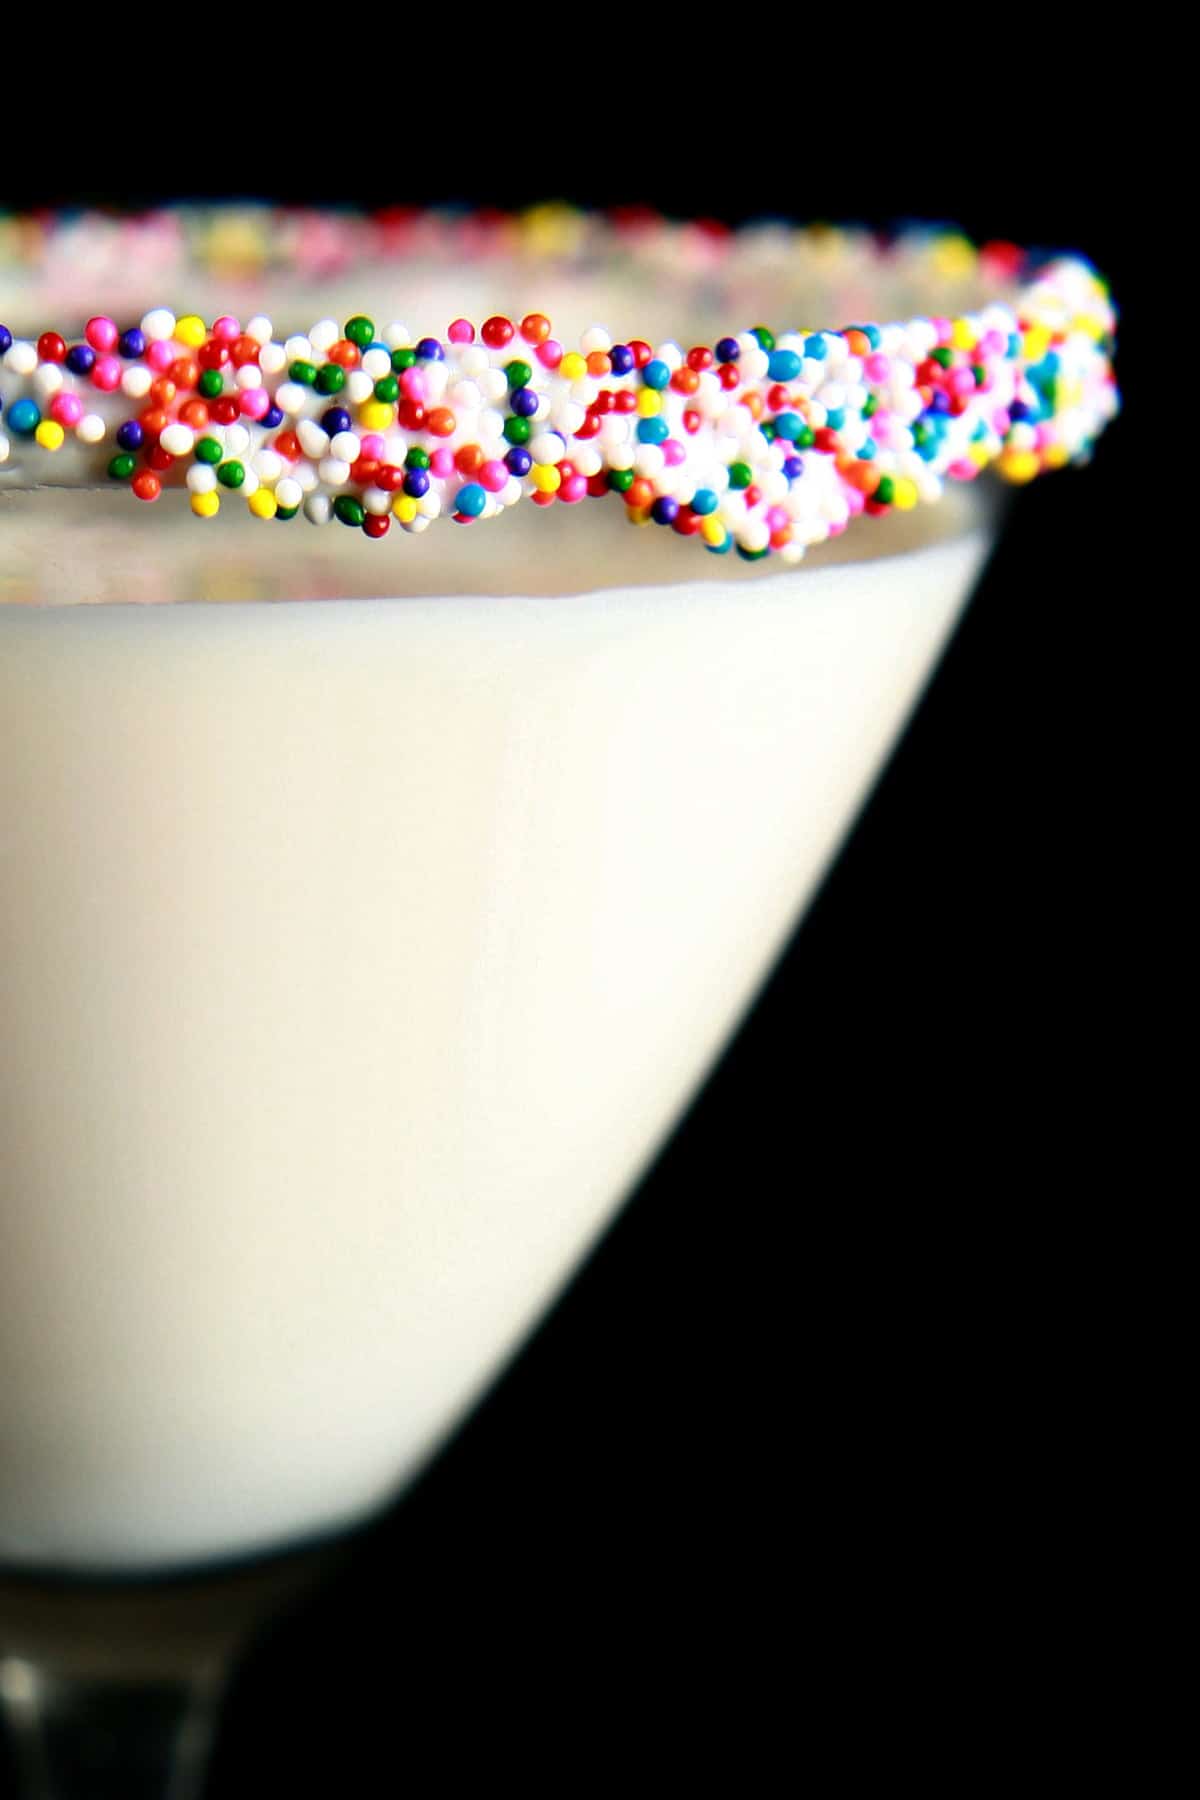 A close up view of a birthday cake martini - a creamy white drink in a martini glass. The rim is coated with colourful nonpareils.